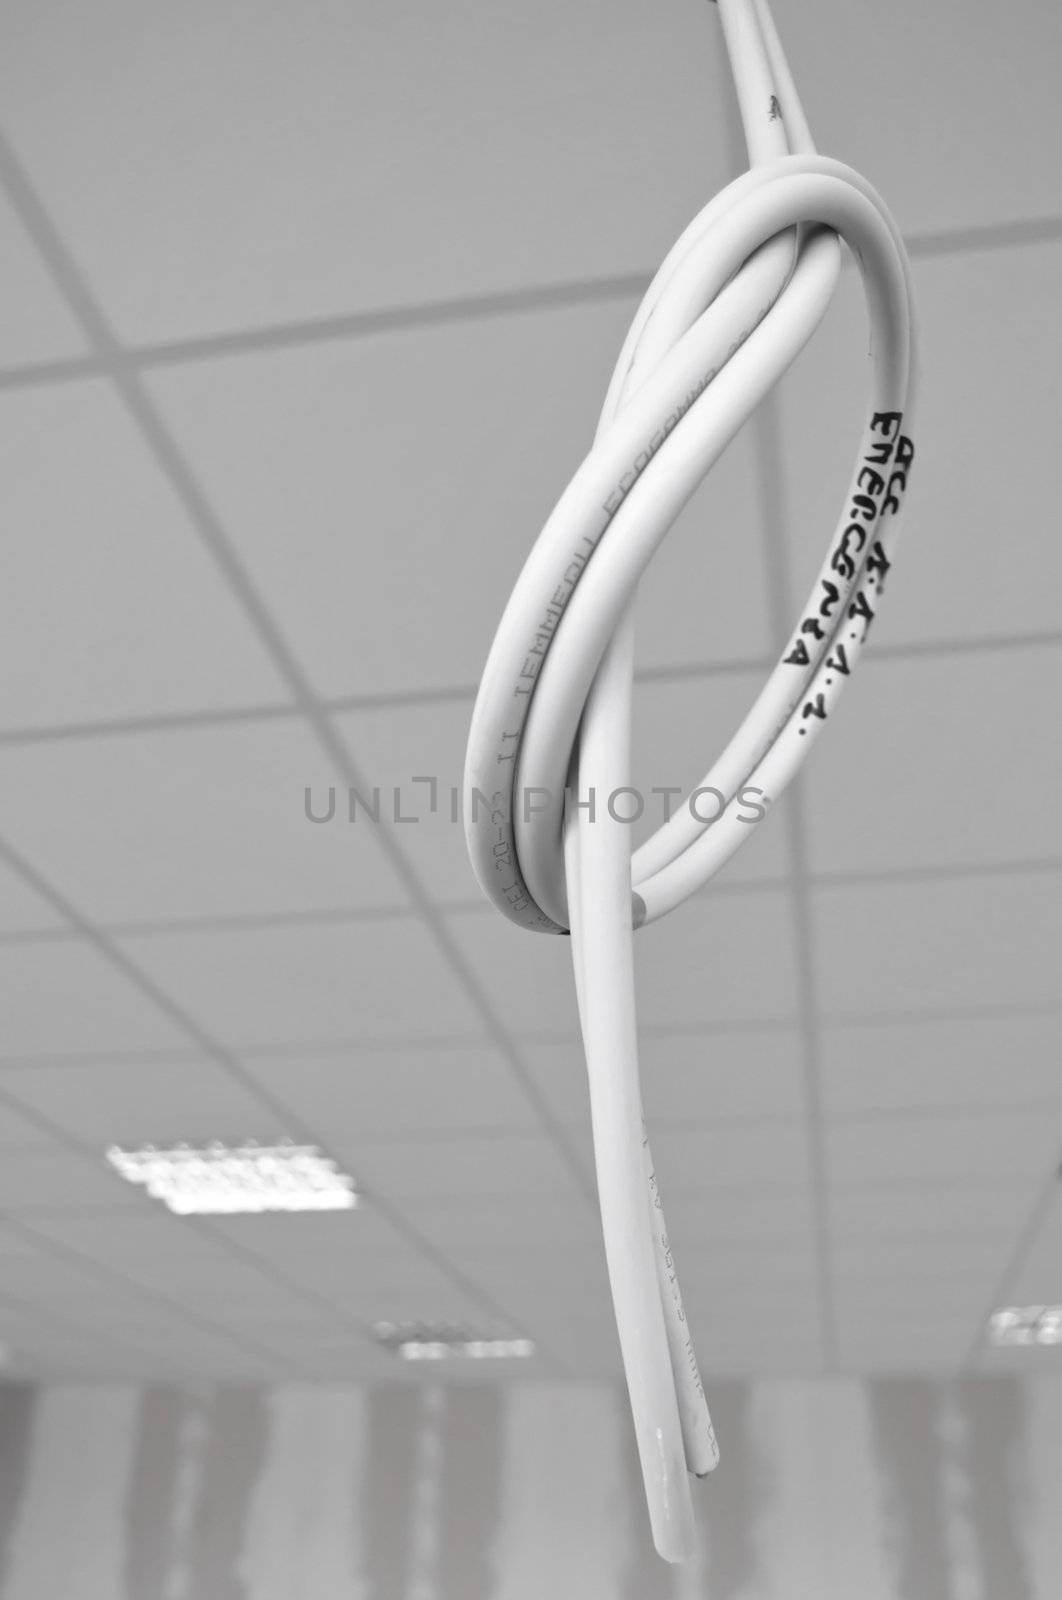 Electrical cable node in a interior under construction office